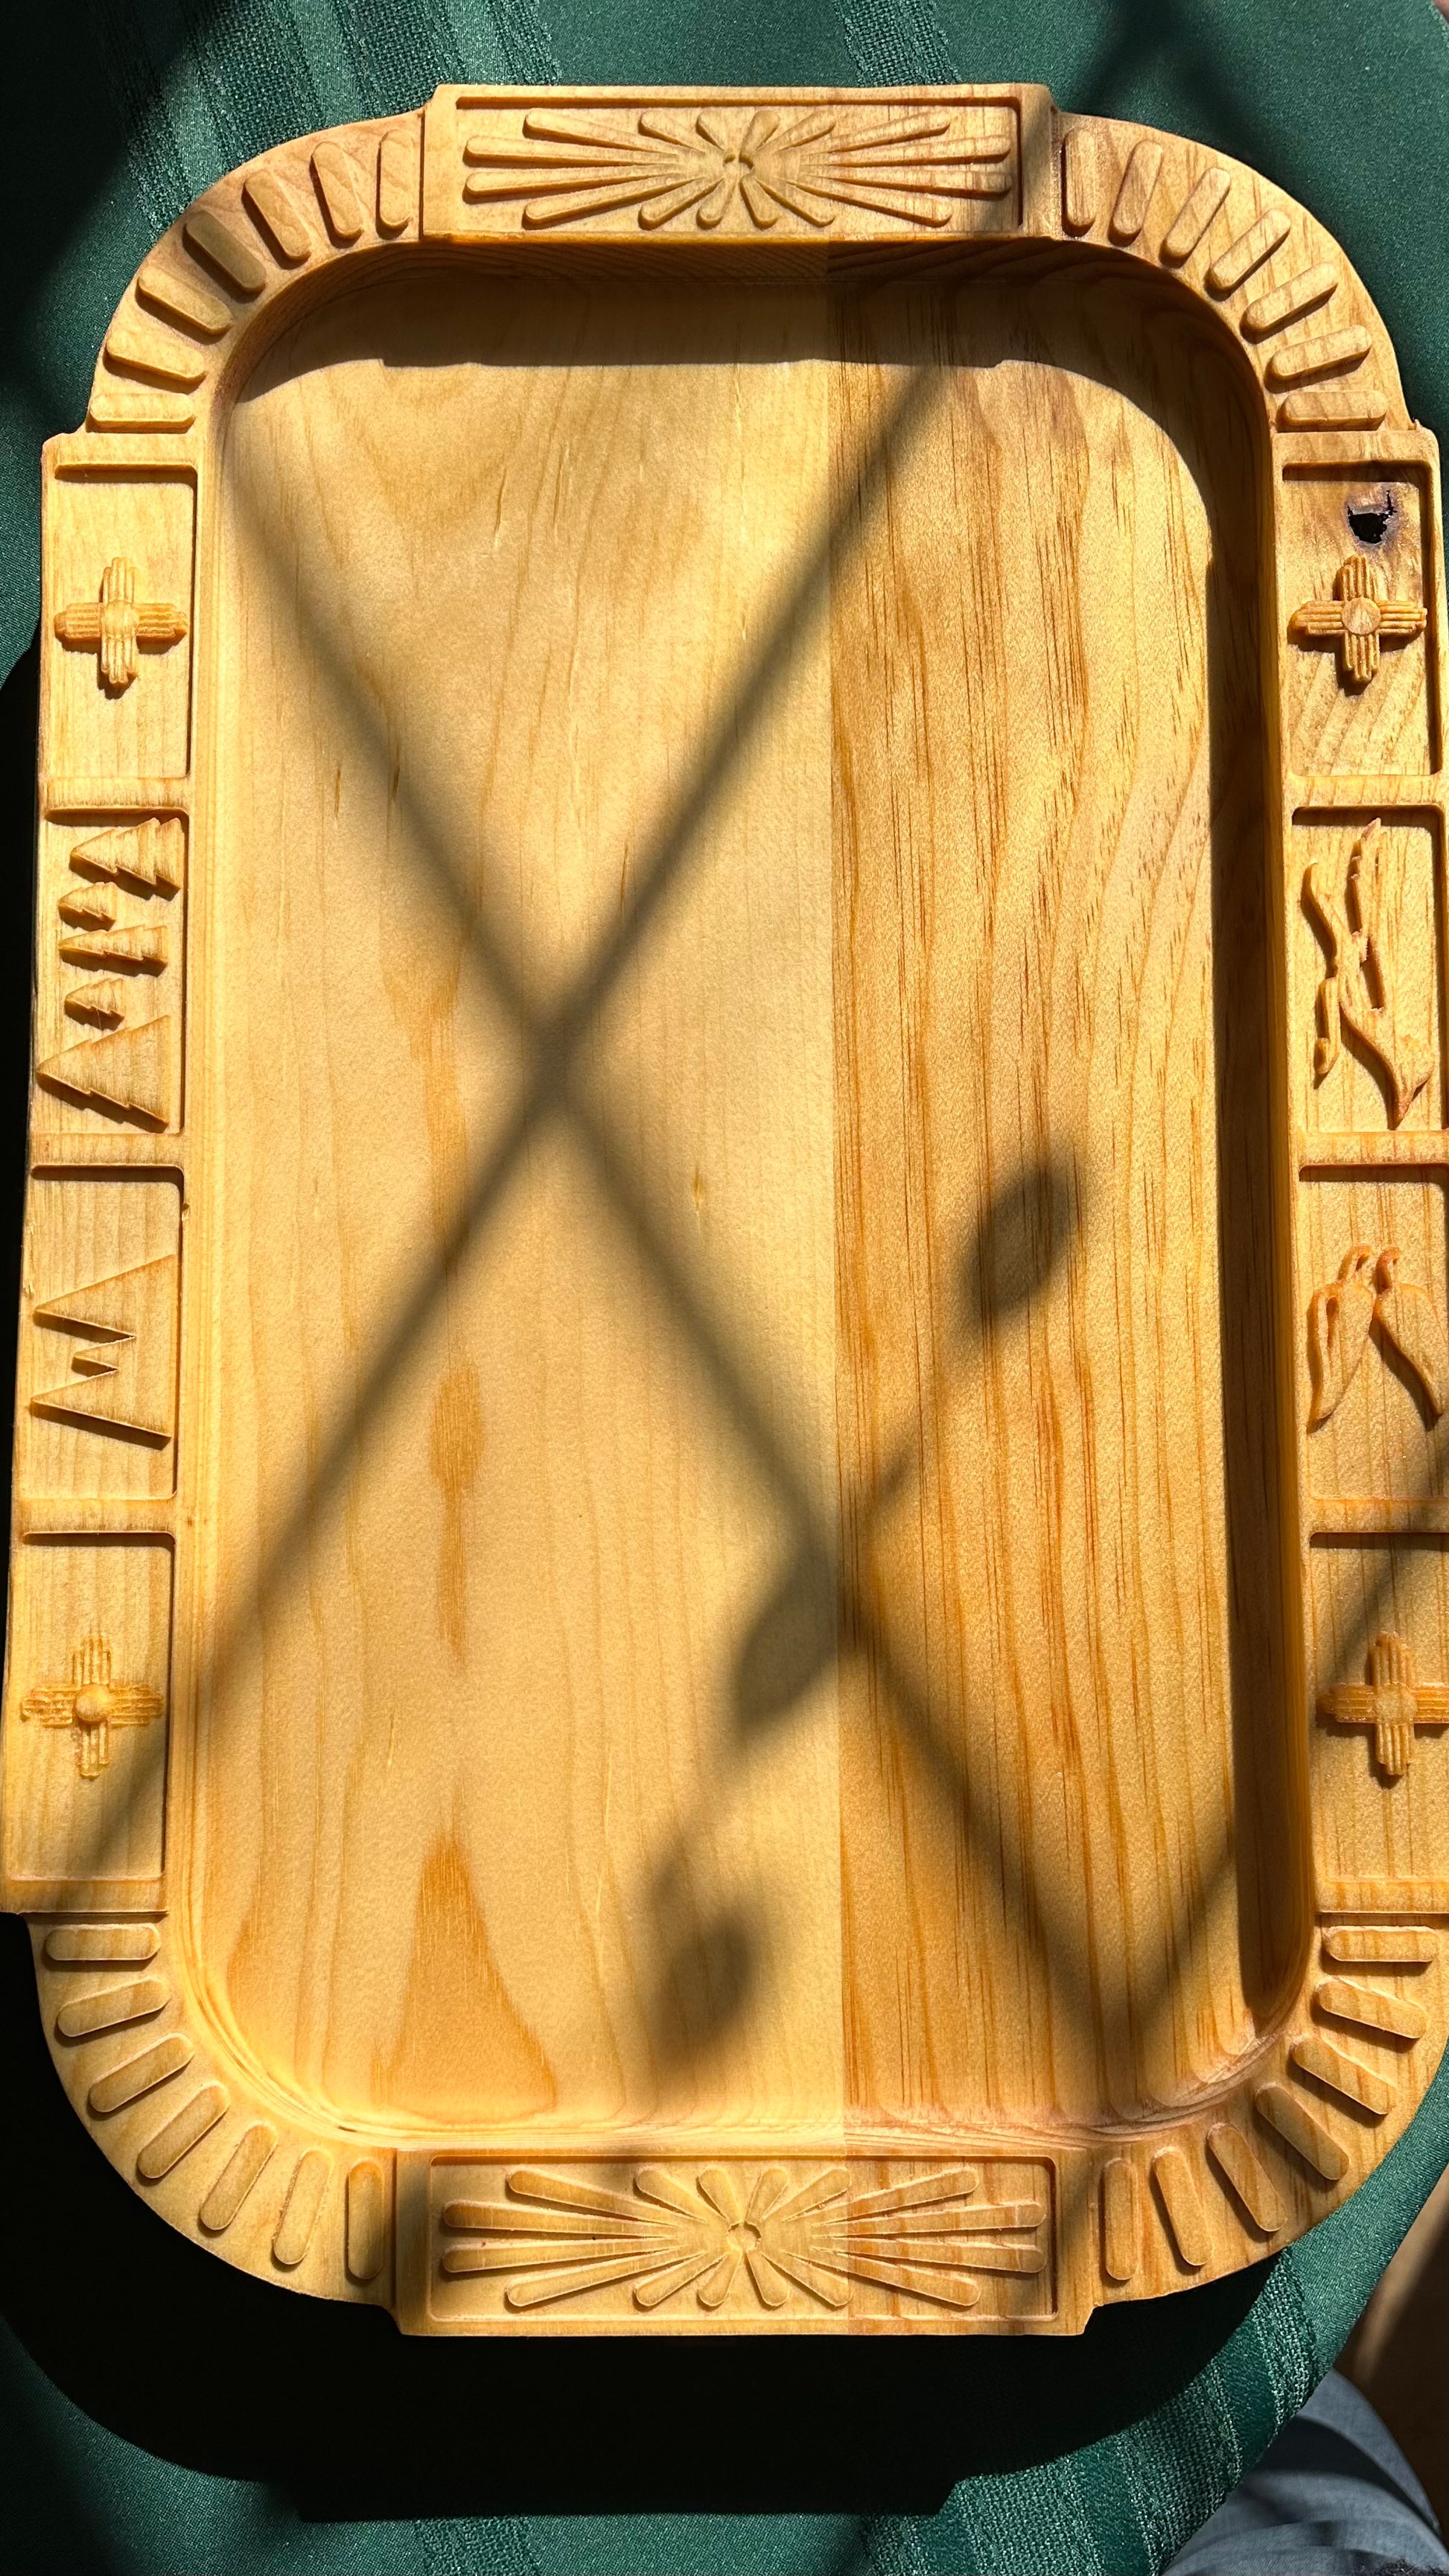 The morning sun makes the wood on this board look like honey.